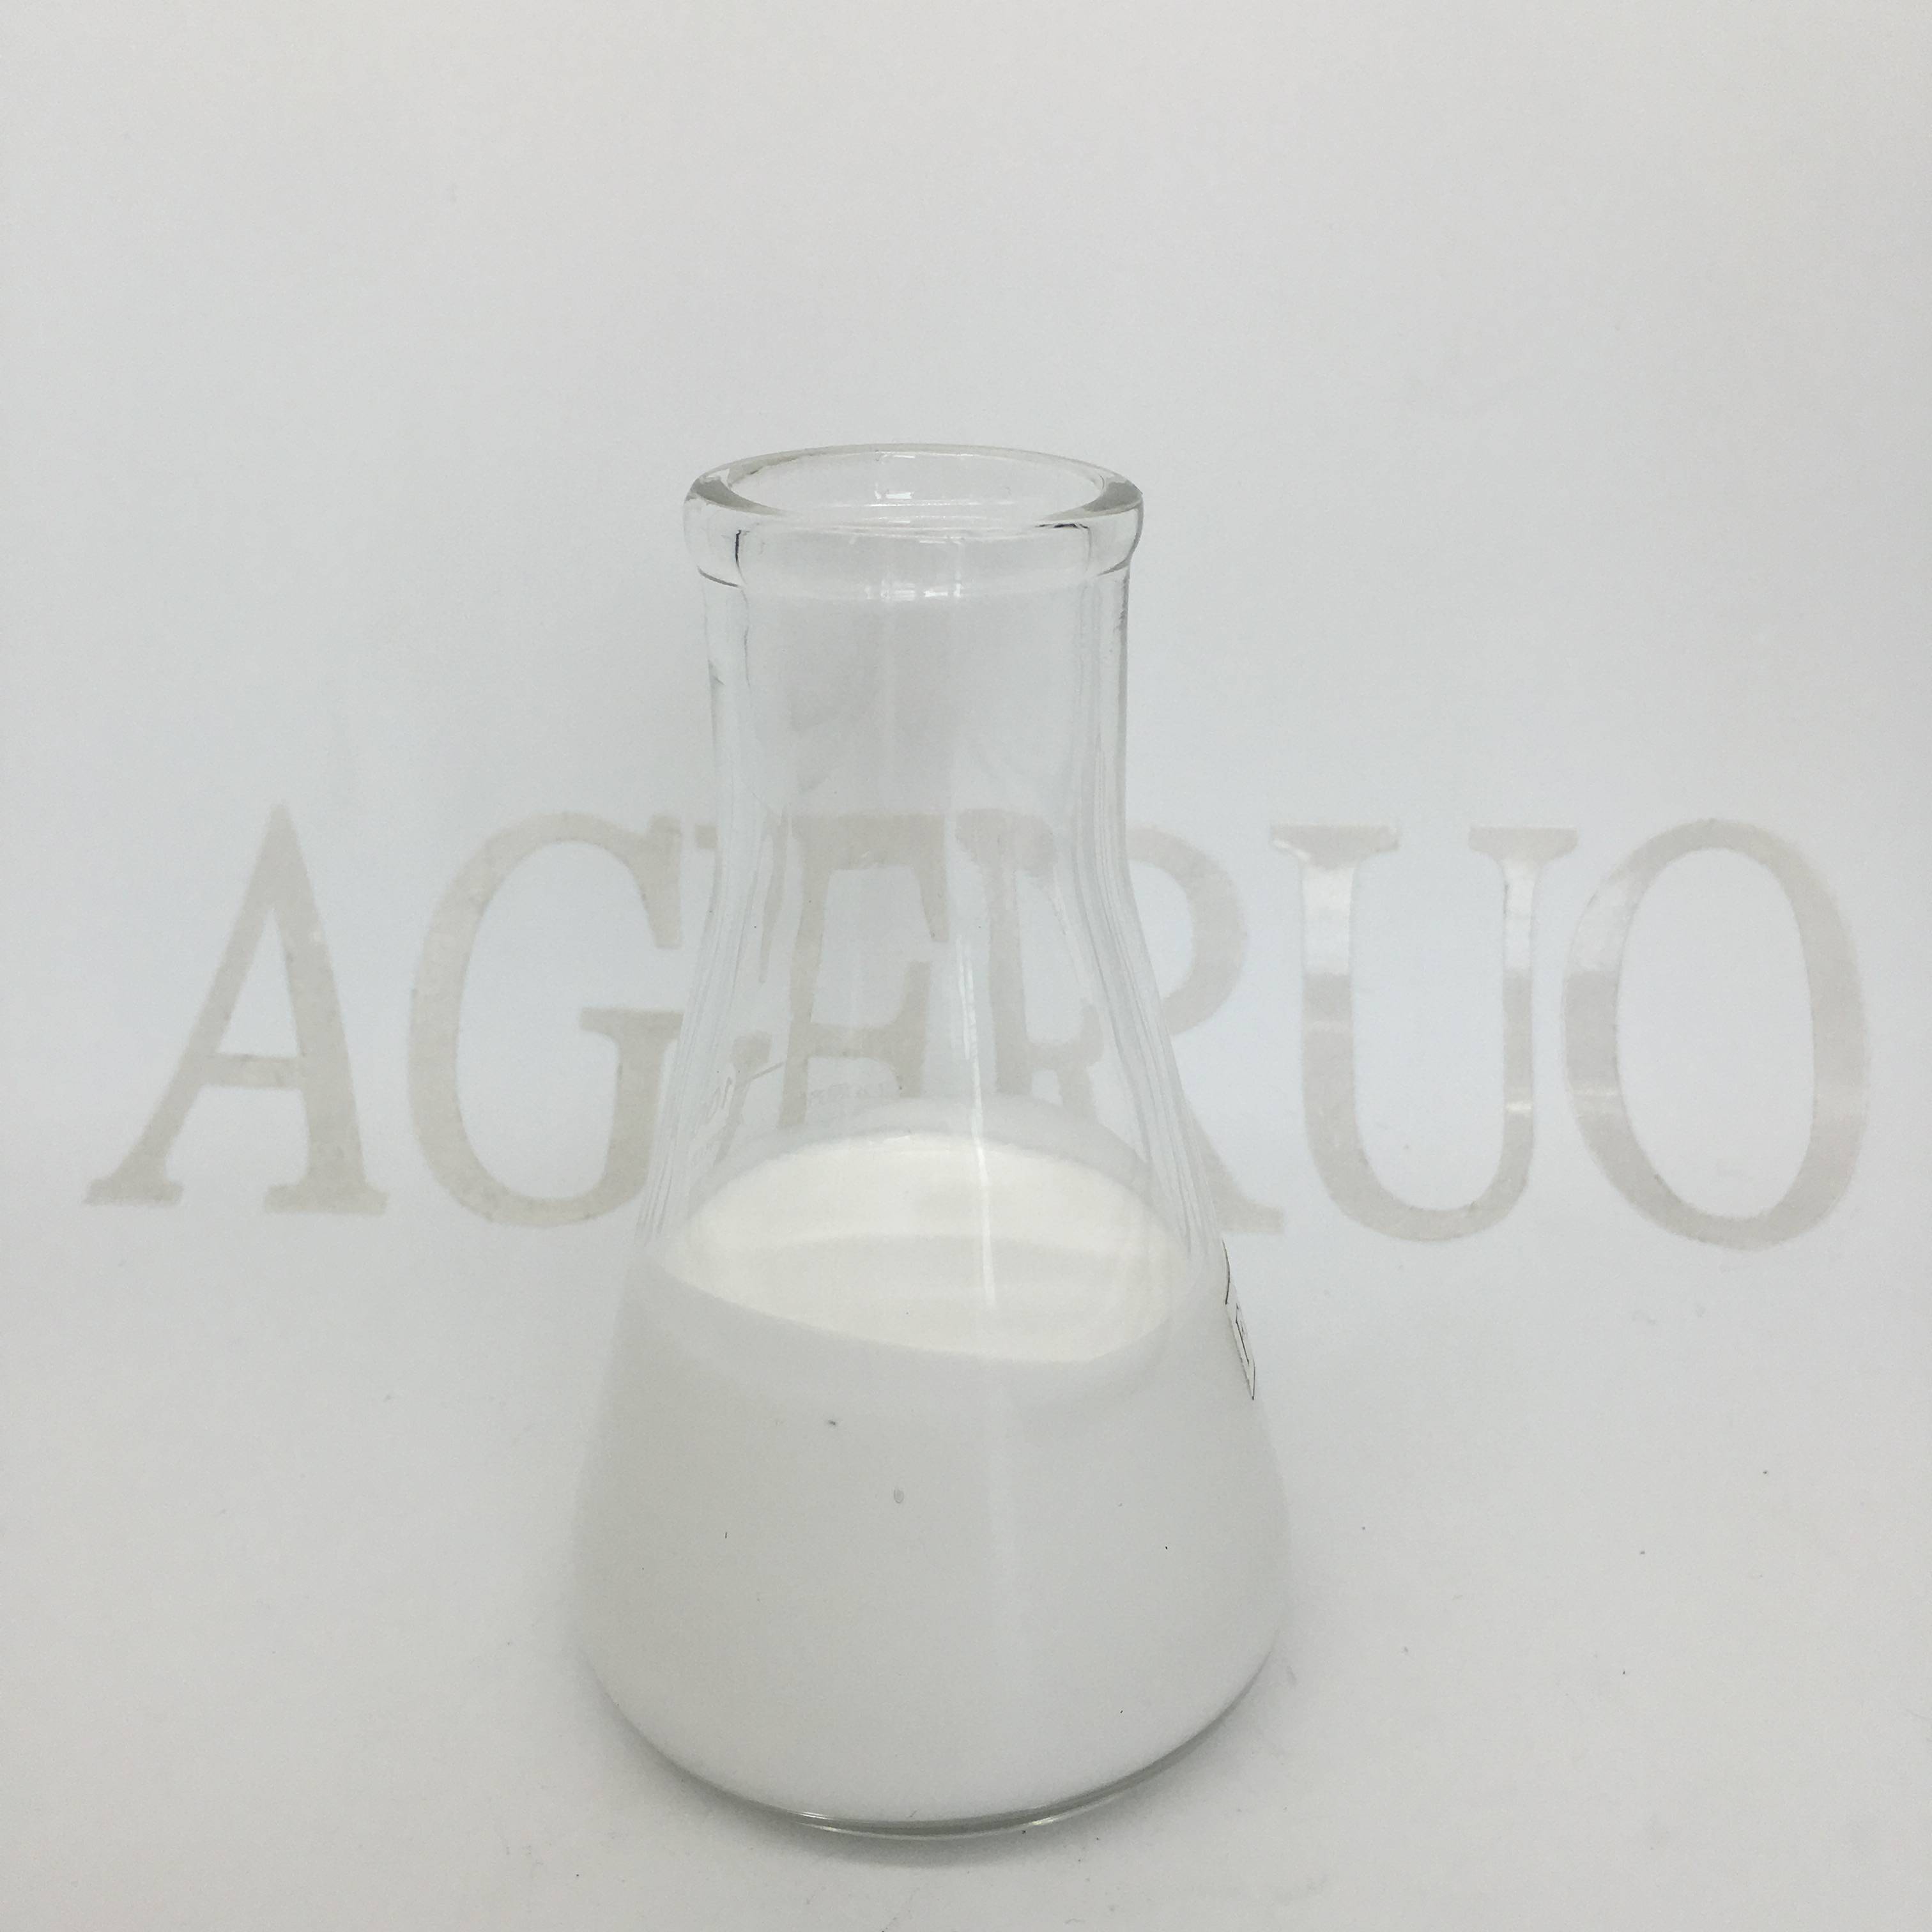 Chinese wholesale Malathion Insecticide Powder - Fipronil 3% GR Insecticide with Good Quality Pesticide Crop Protection – AgeruoBiotech